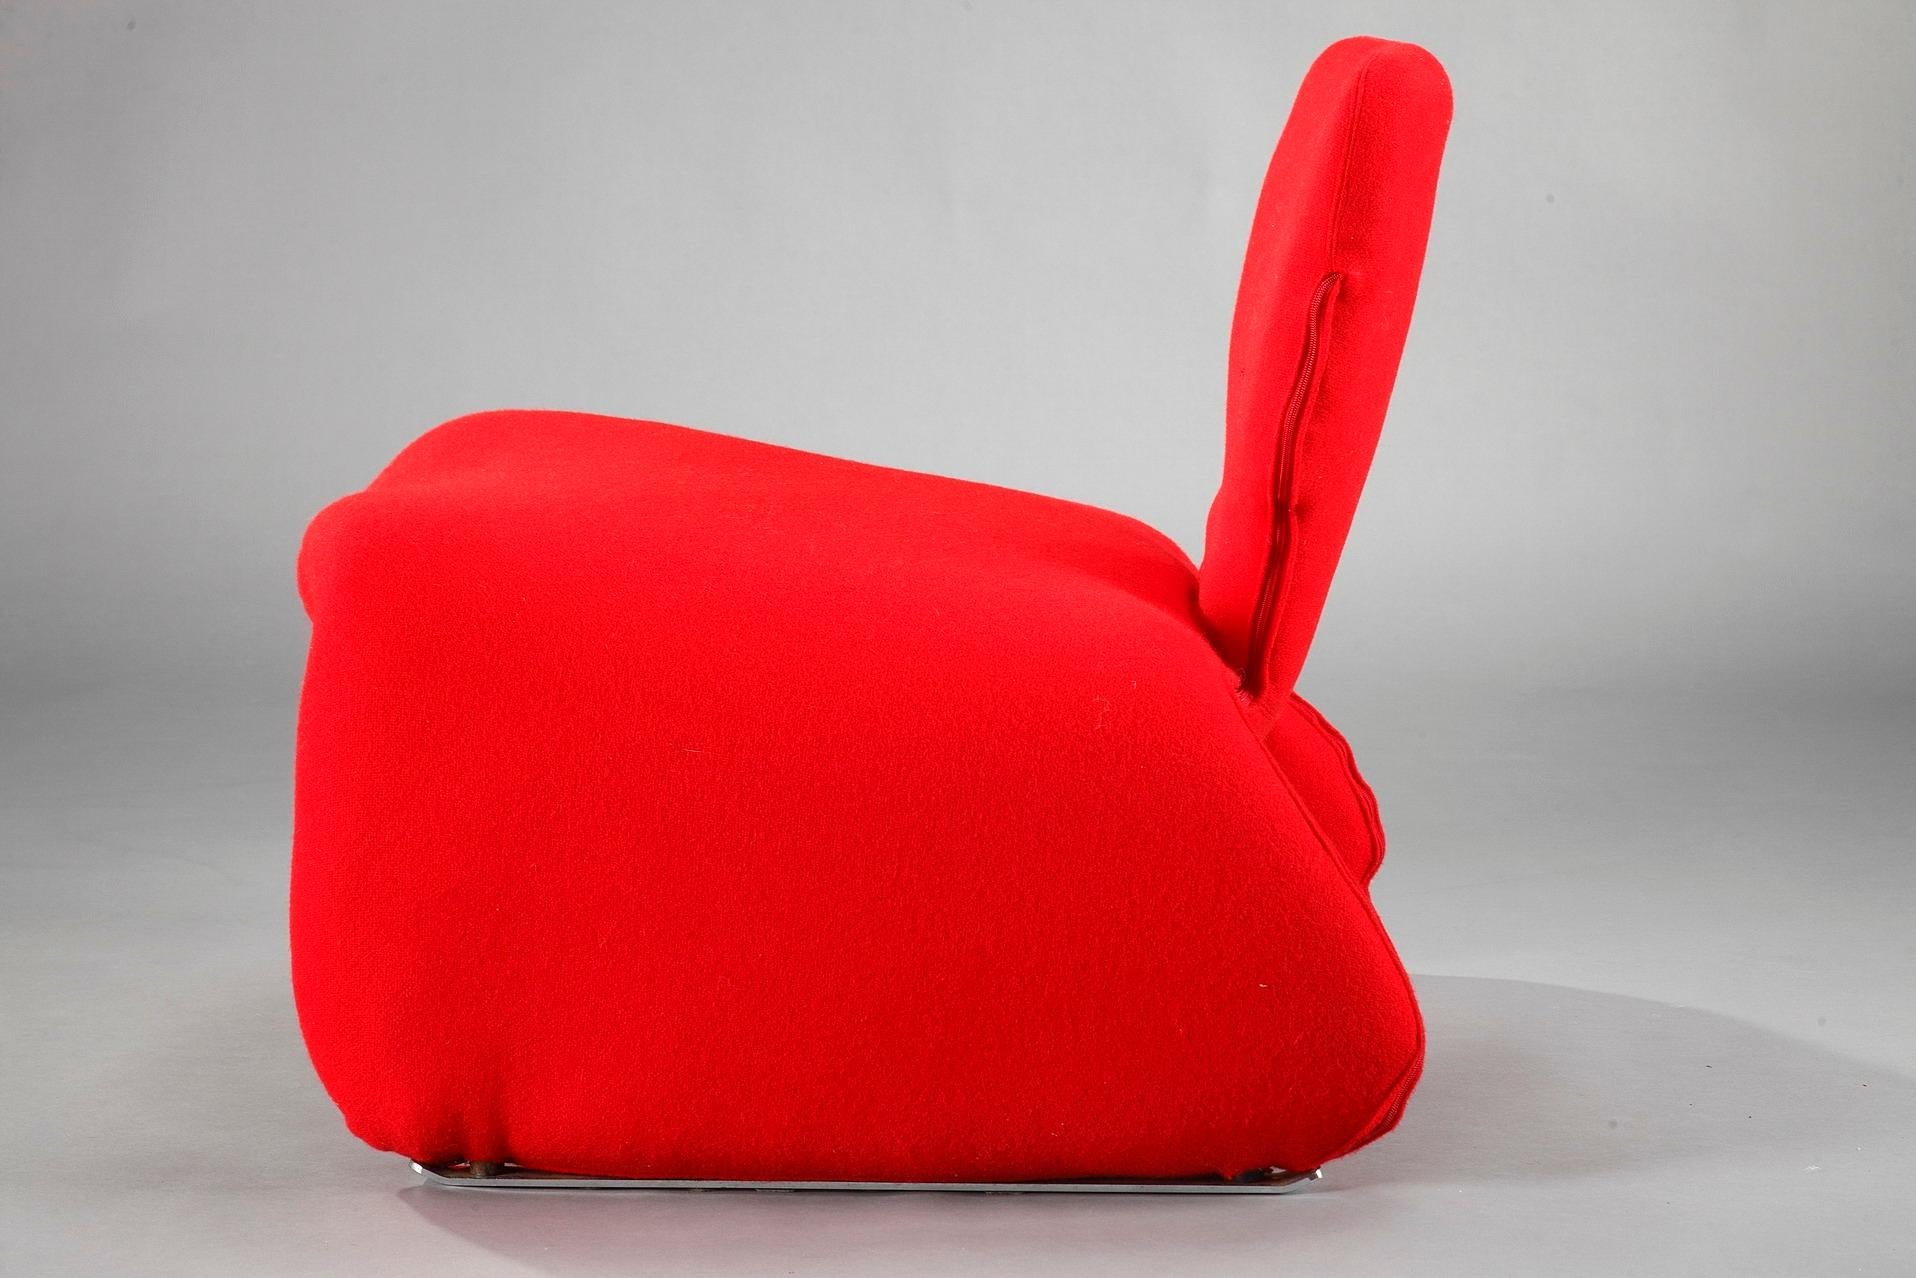 Djinn chair designed by Olivier Mourgue in the 1960s for Airborne. Metal structure lined with foam and covered with red fabric. Steel skates. This chair is an icon of 20th century design made famous by Stanley Kubrick in the movie 2001, the Space